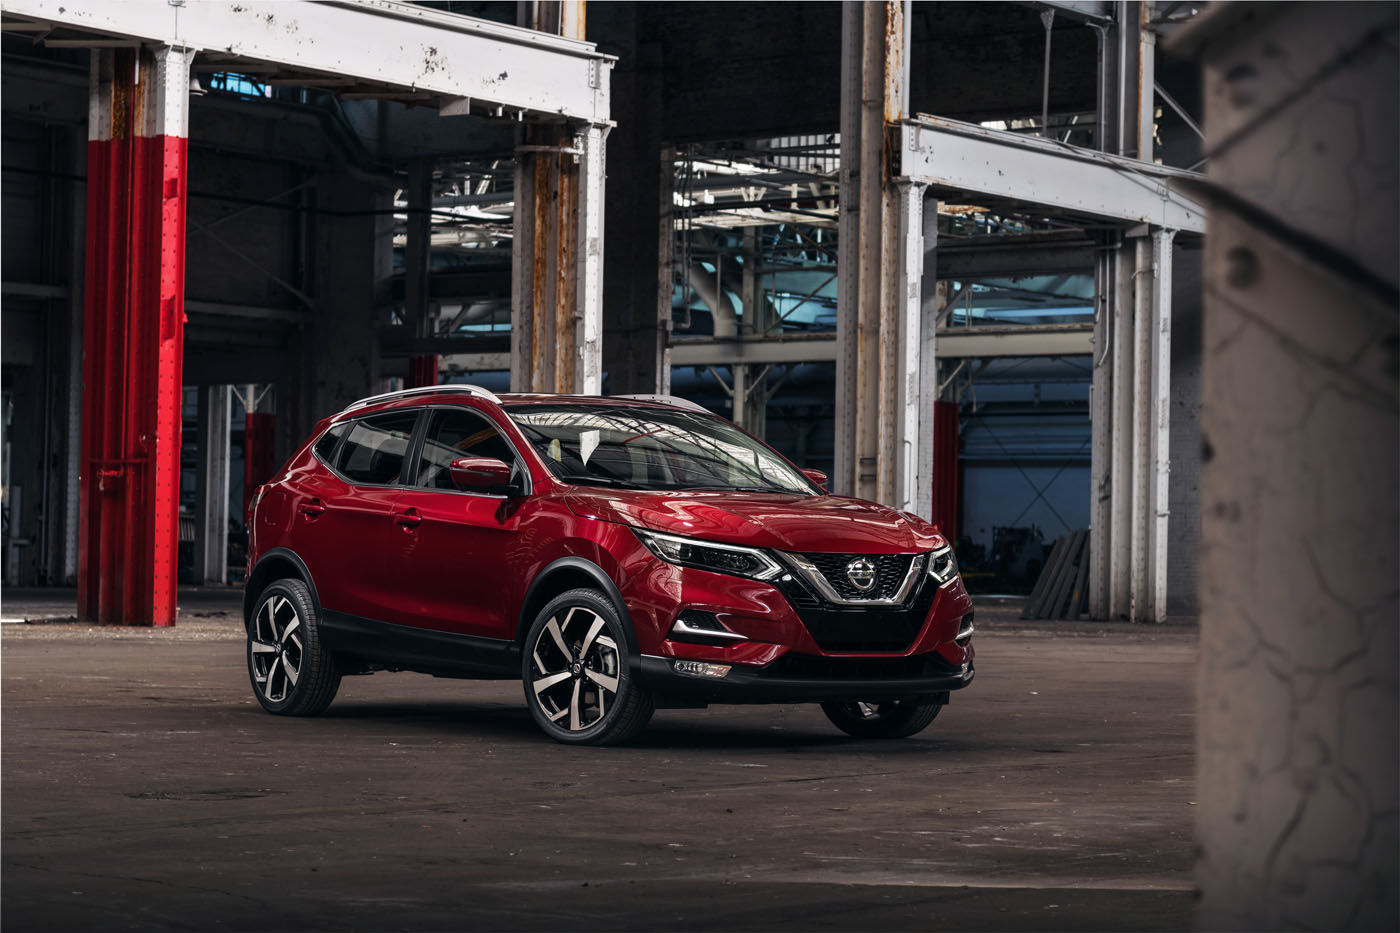 Here's the all-new 2020 Nissan Qashqai